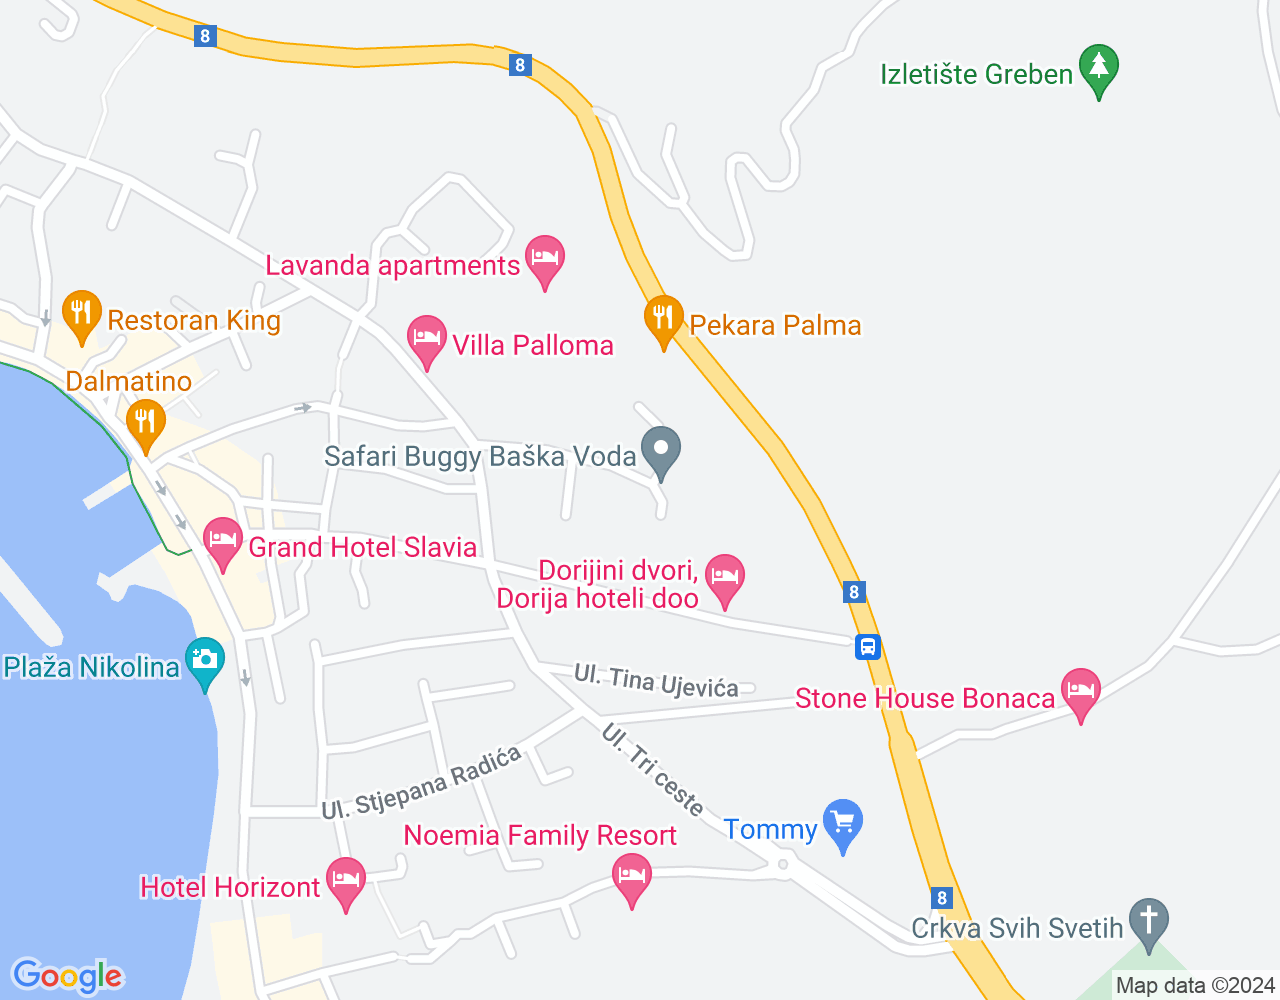 Baška Voda is ready to welcome you. In apartment's close area there are grocery store, drug store, centre with bars and restaurants. The beach is also just 300 meters away. - 43.35763 16.95348